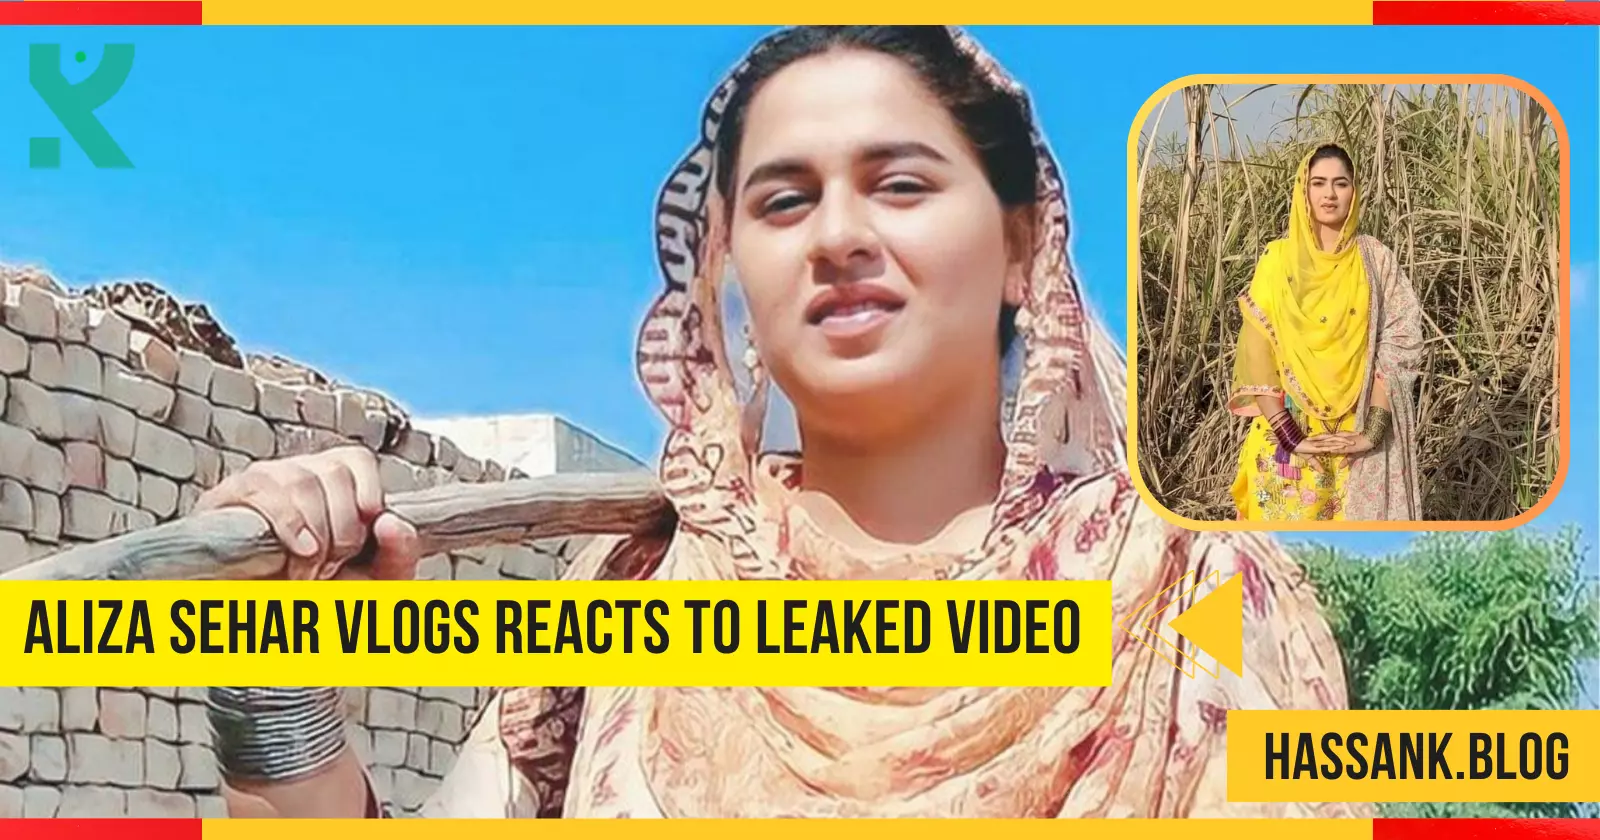 Aliza Sehar Vlogs Reacts to Leaked Video